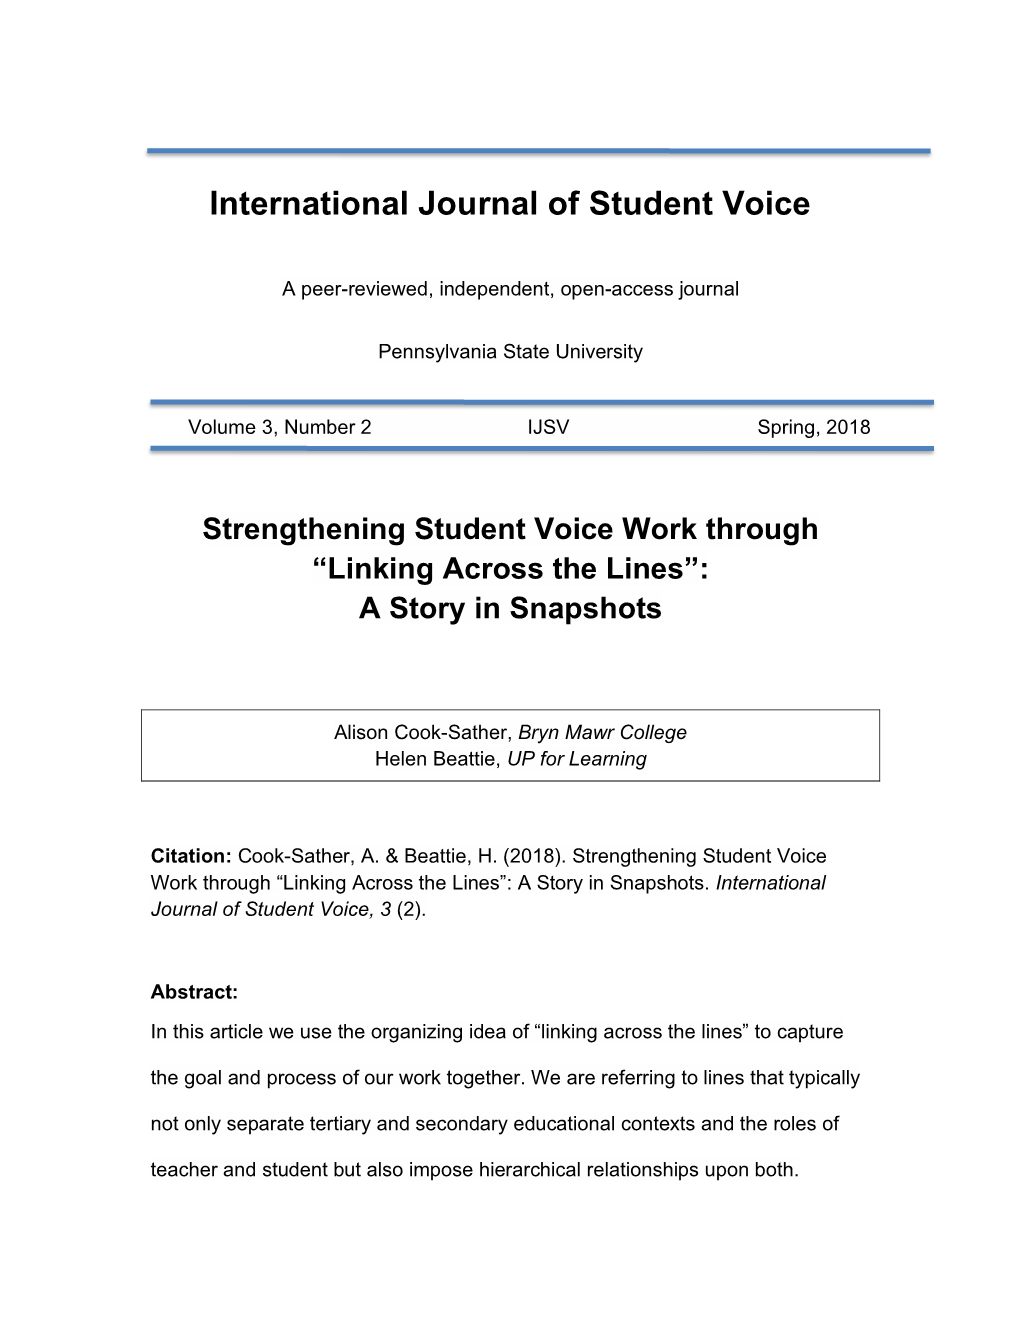 Strengthening Student Voice Work Through “Linking Across the Lines”: a Story in Snapshots